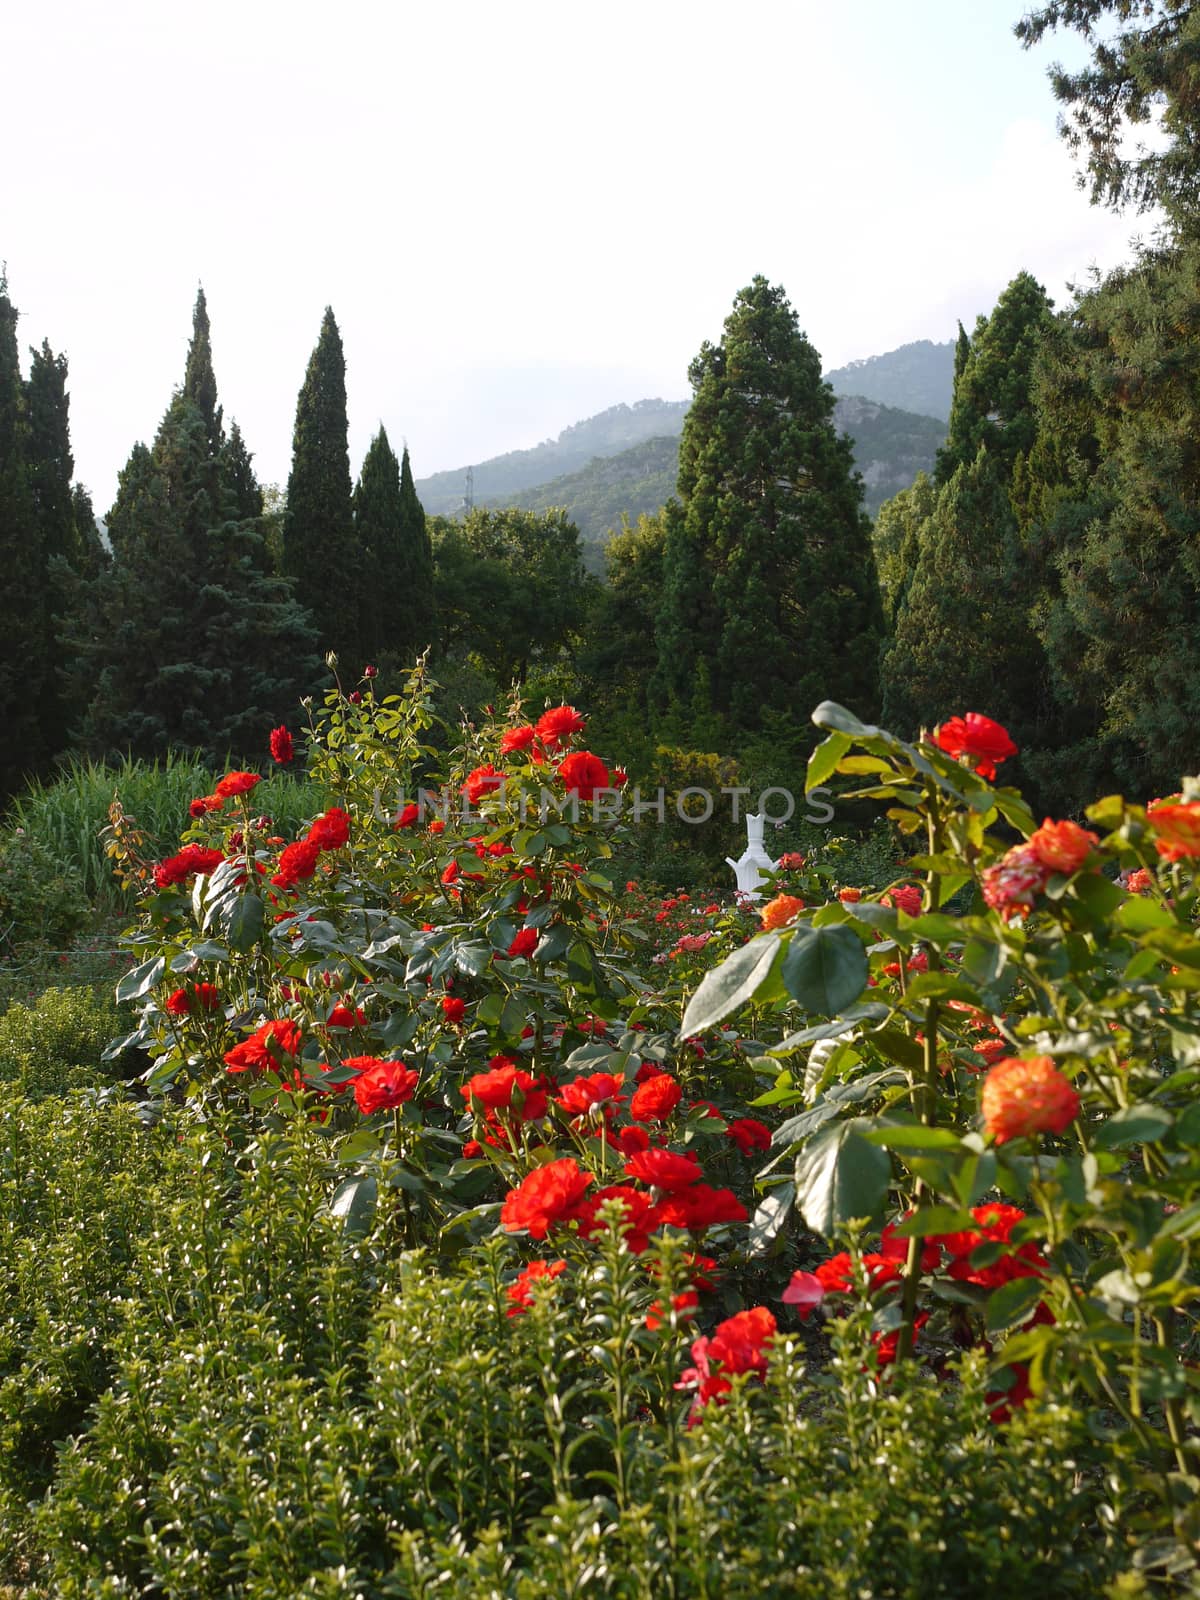 Shrubs with lush, red roses on tops against the background of coniferous trees